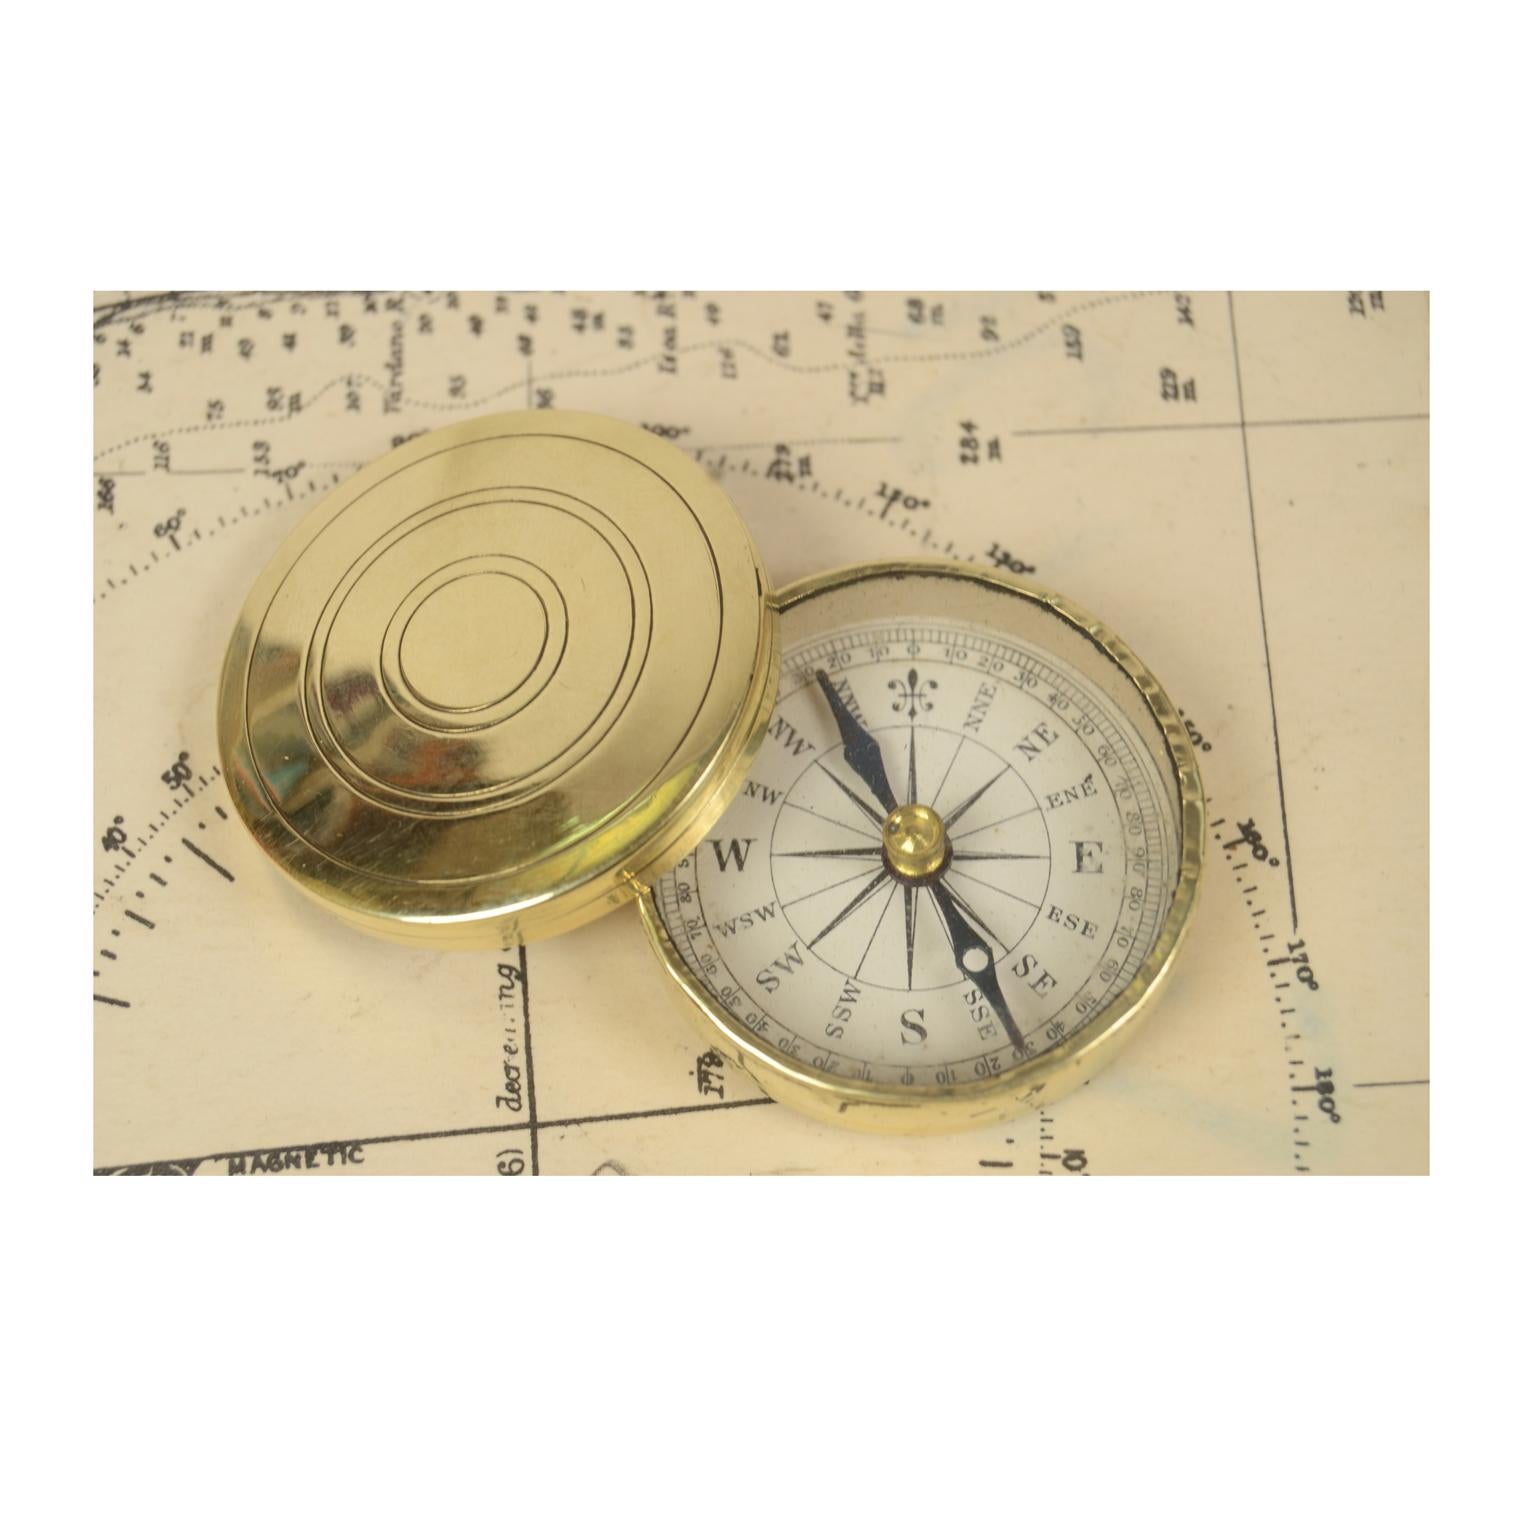 where to find the old brass compass